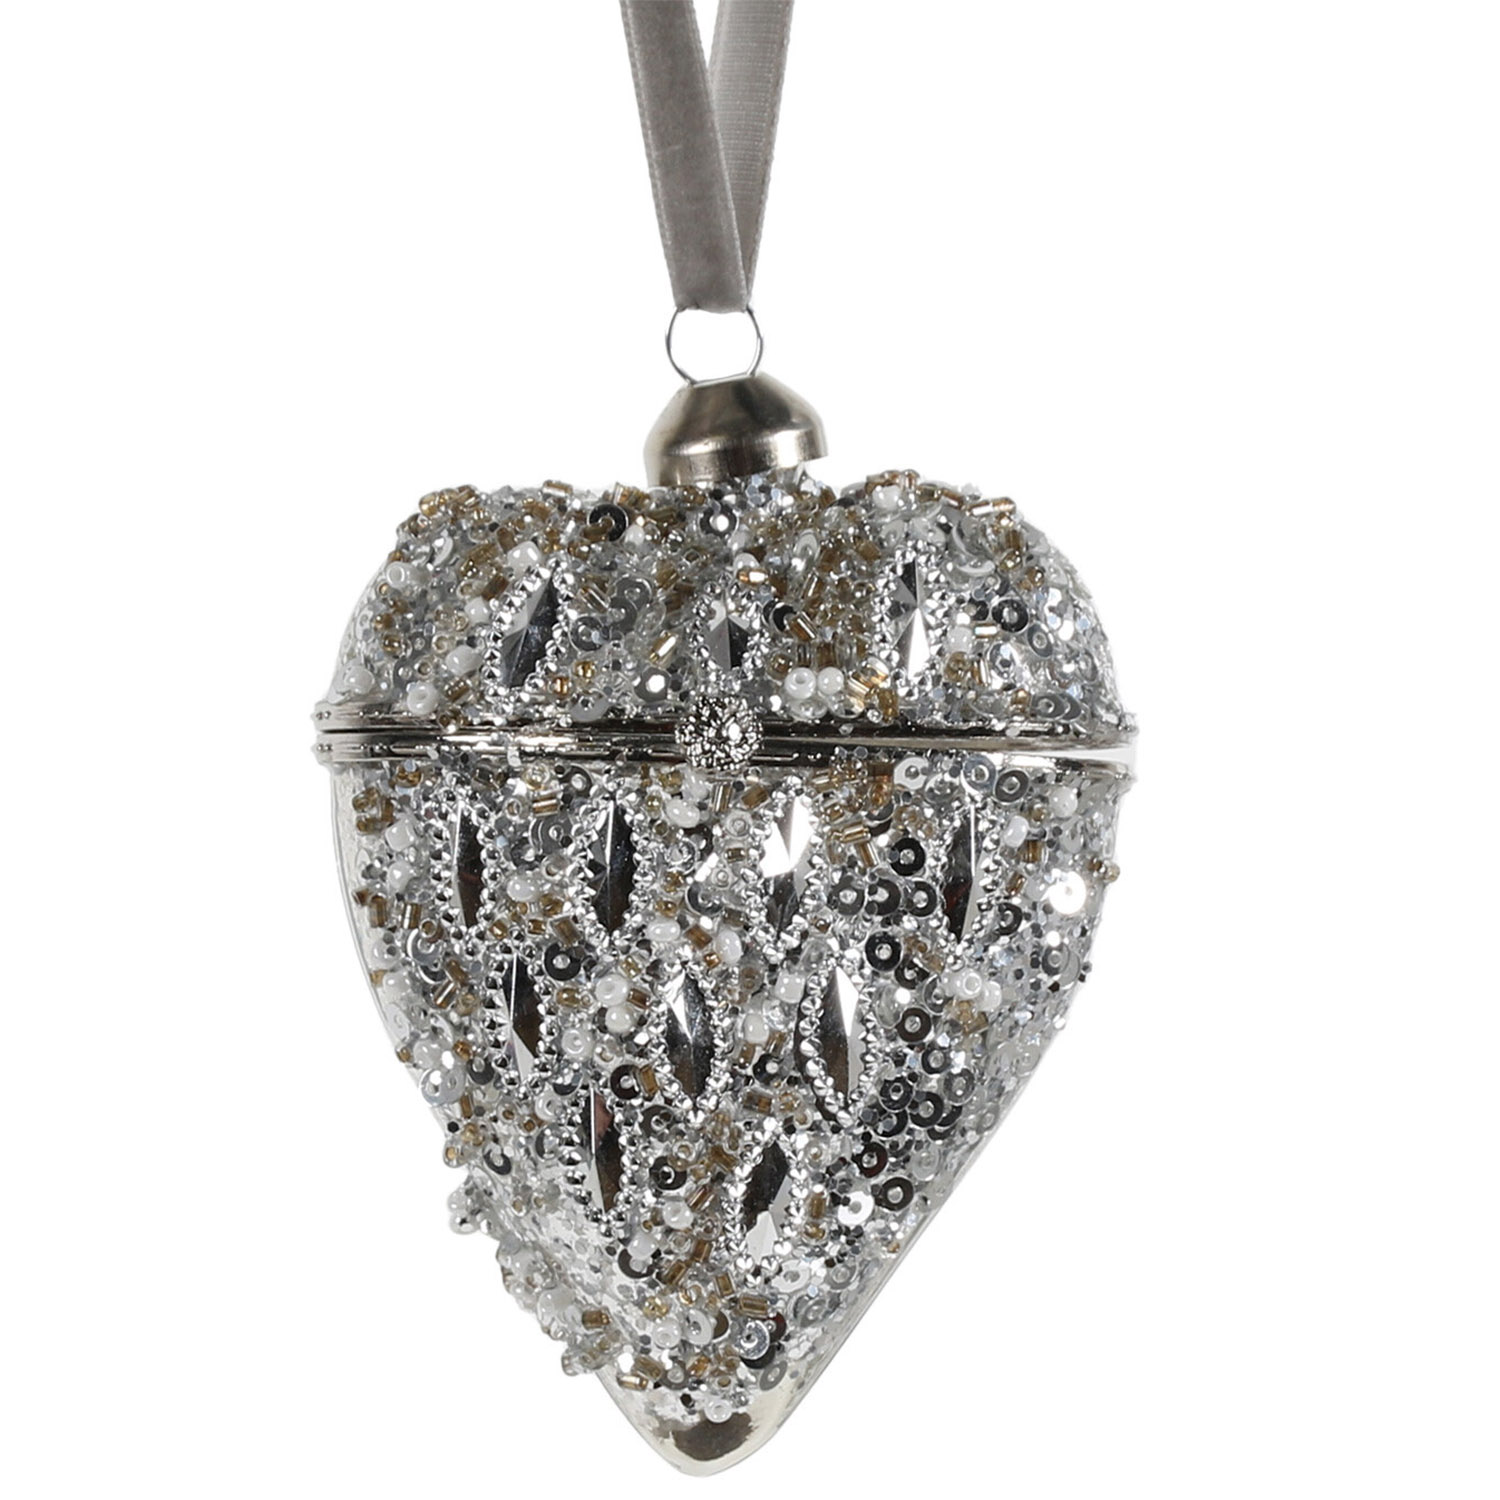 Chic Noir Silver Jewelled Heart Bauble with Compartment Image 1